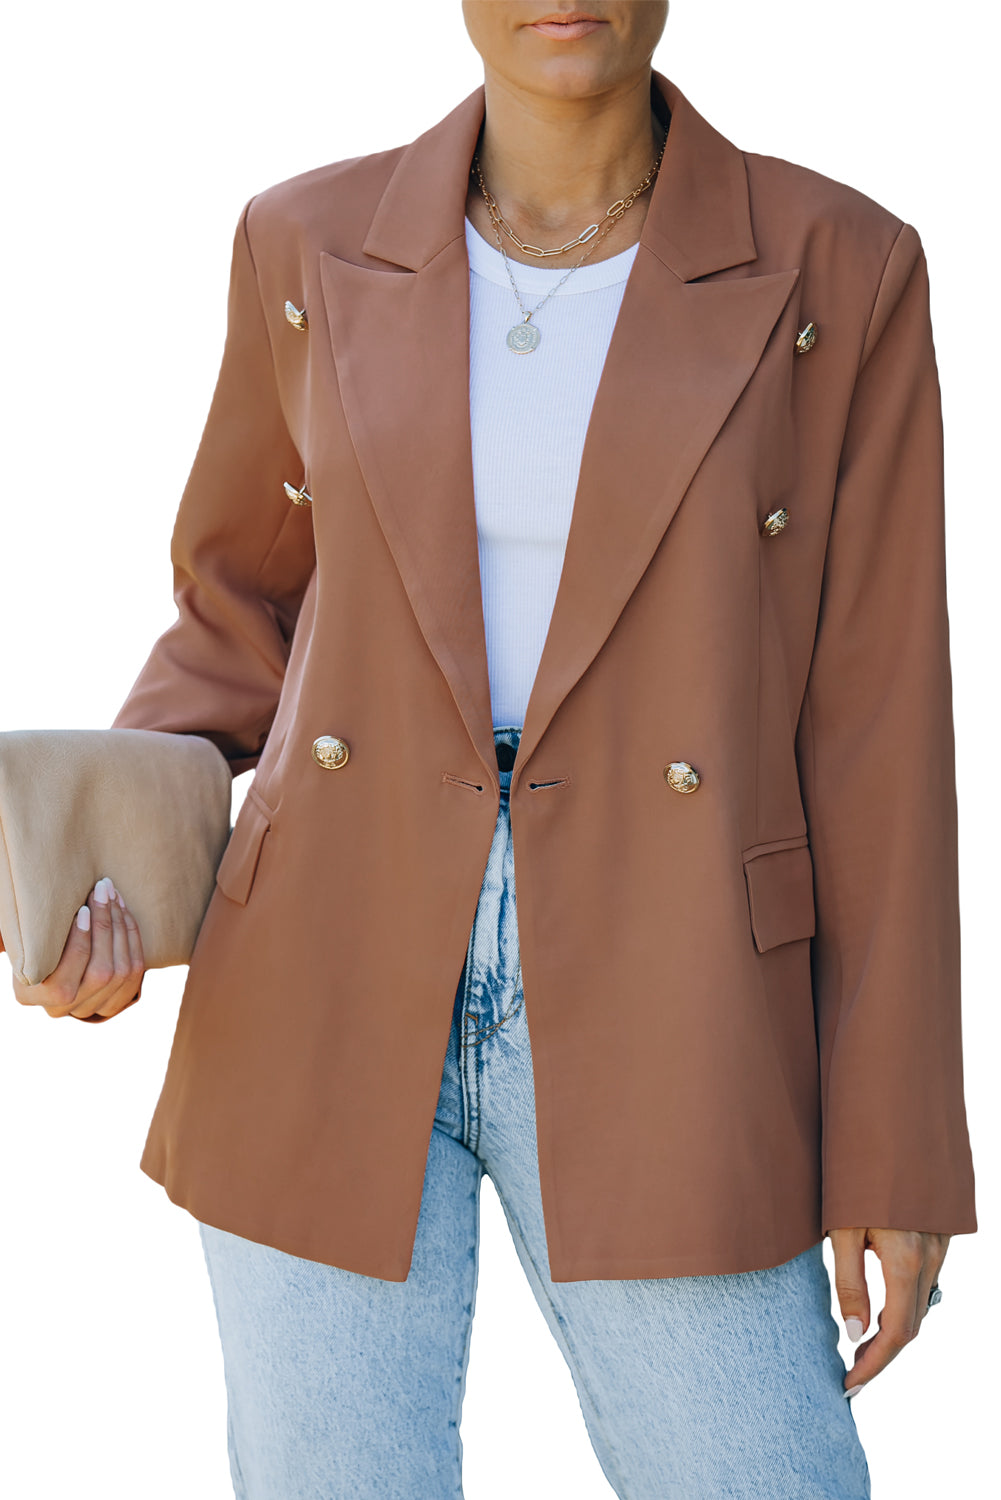 Double Breasted Lapel Neck Flap Pocket Casual Brown Blazer for Women - Bellisima Clothing Collective